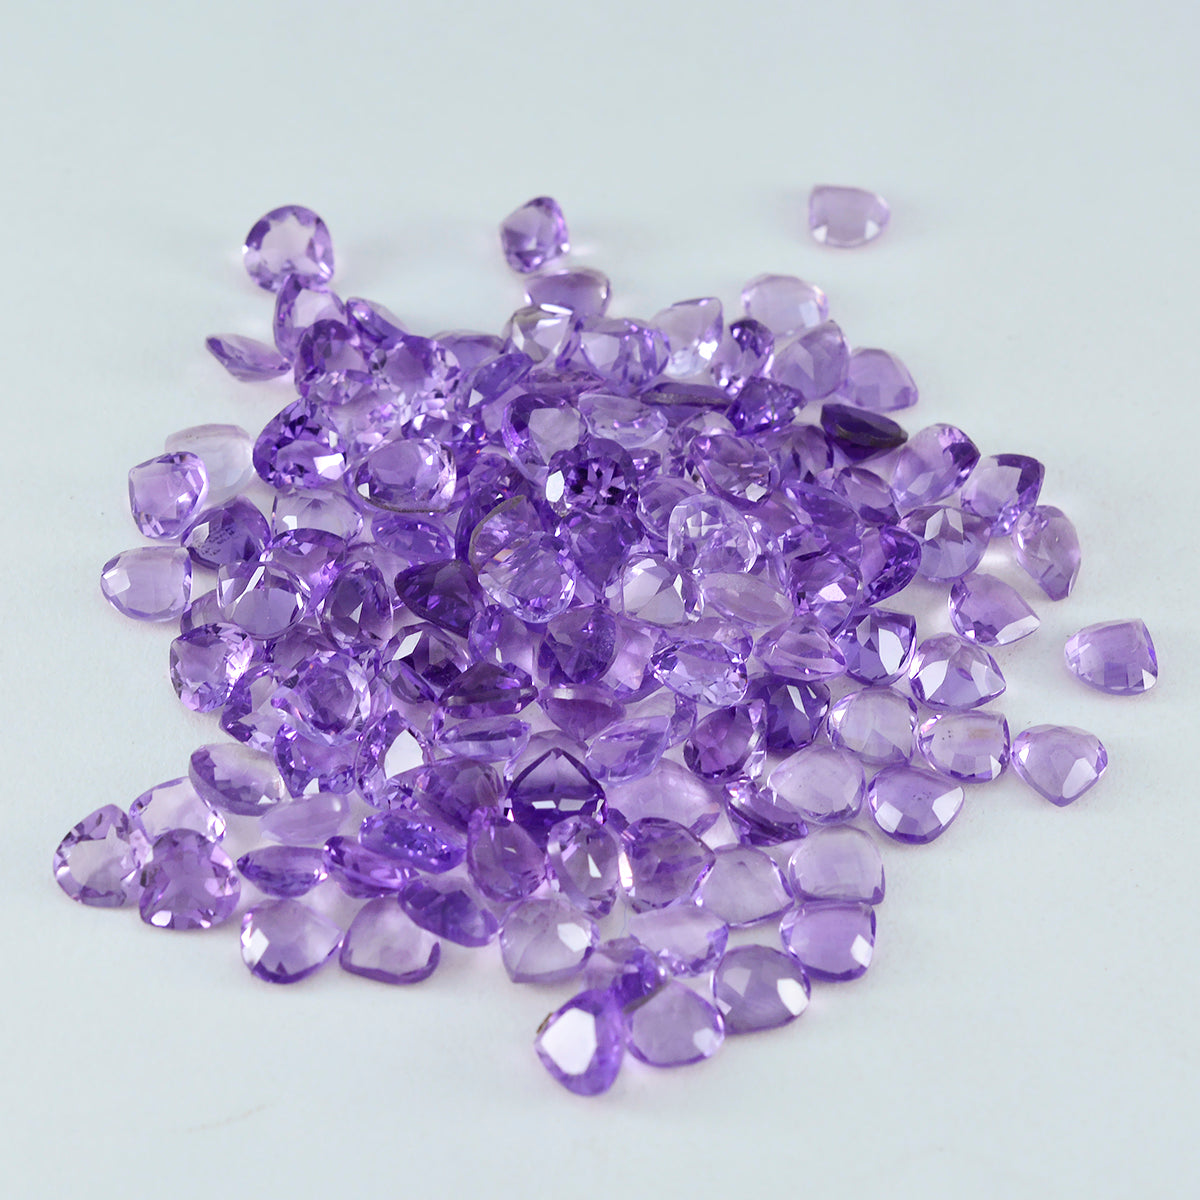 Riyogems 1PC Natural Purple Amethyst Faceted 4X4 mm Heart Shape attractive Quality Gem